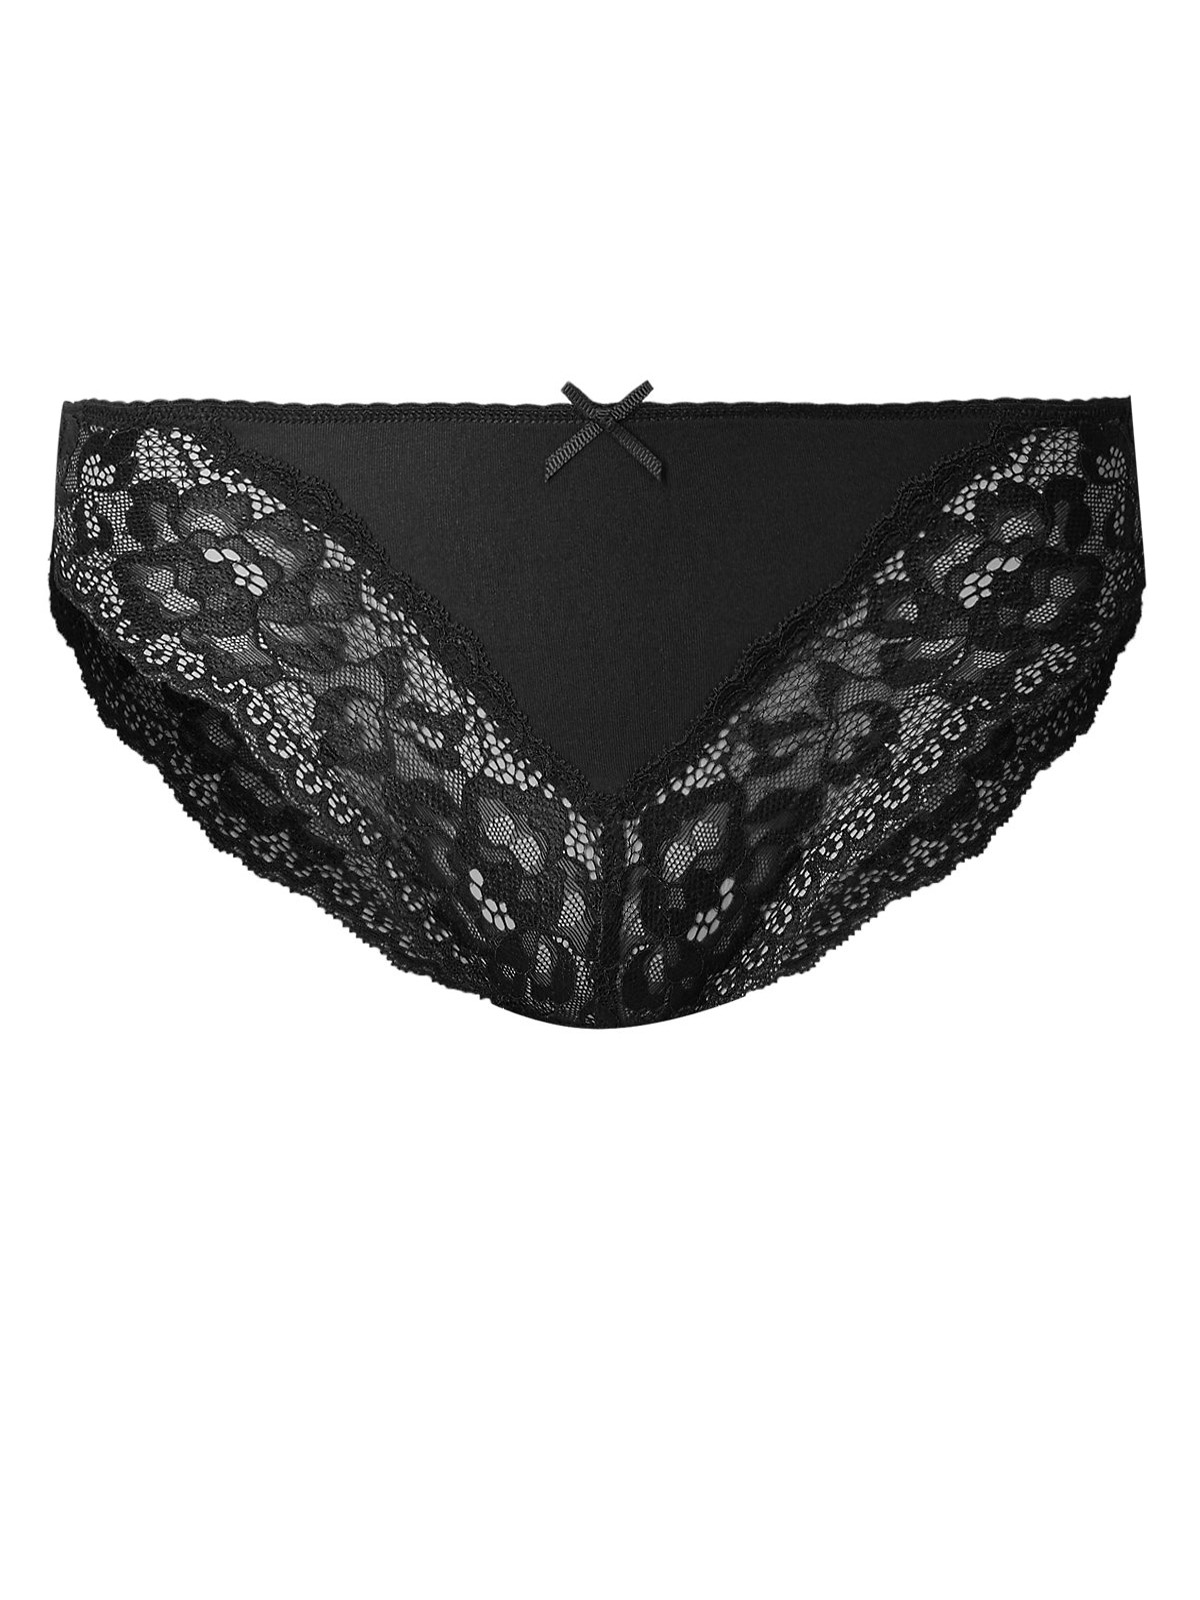 Marks and Spencer - - M&5 BLACK Lace High Leg Brazilian Knickers - Size ...